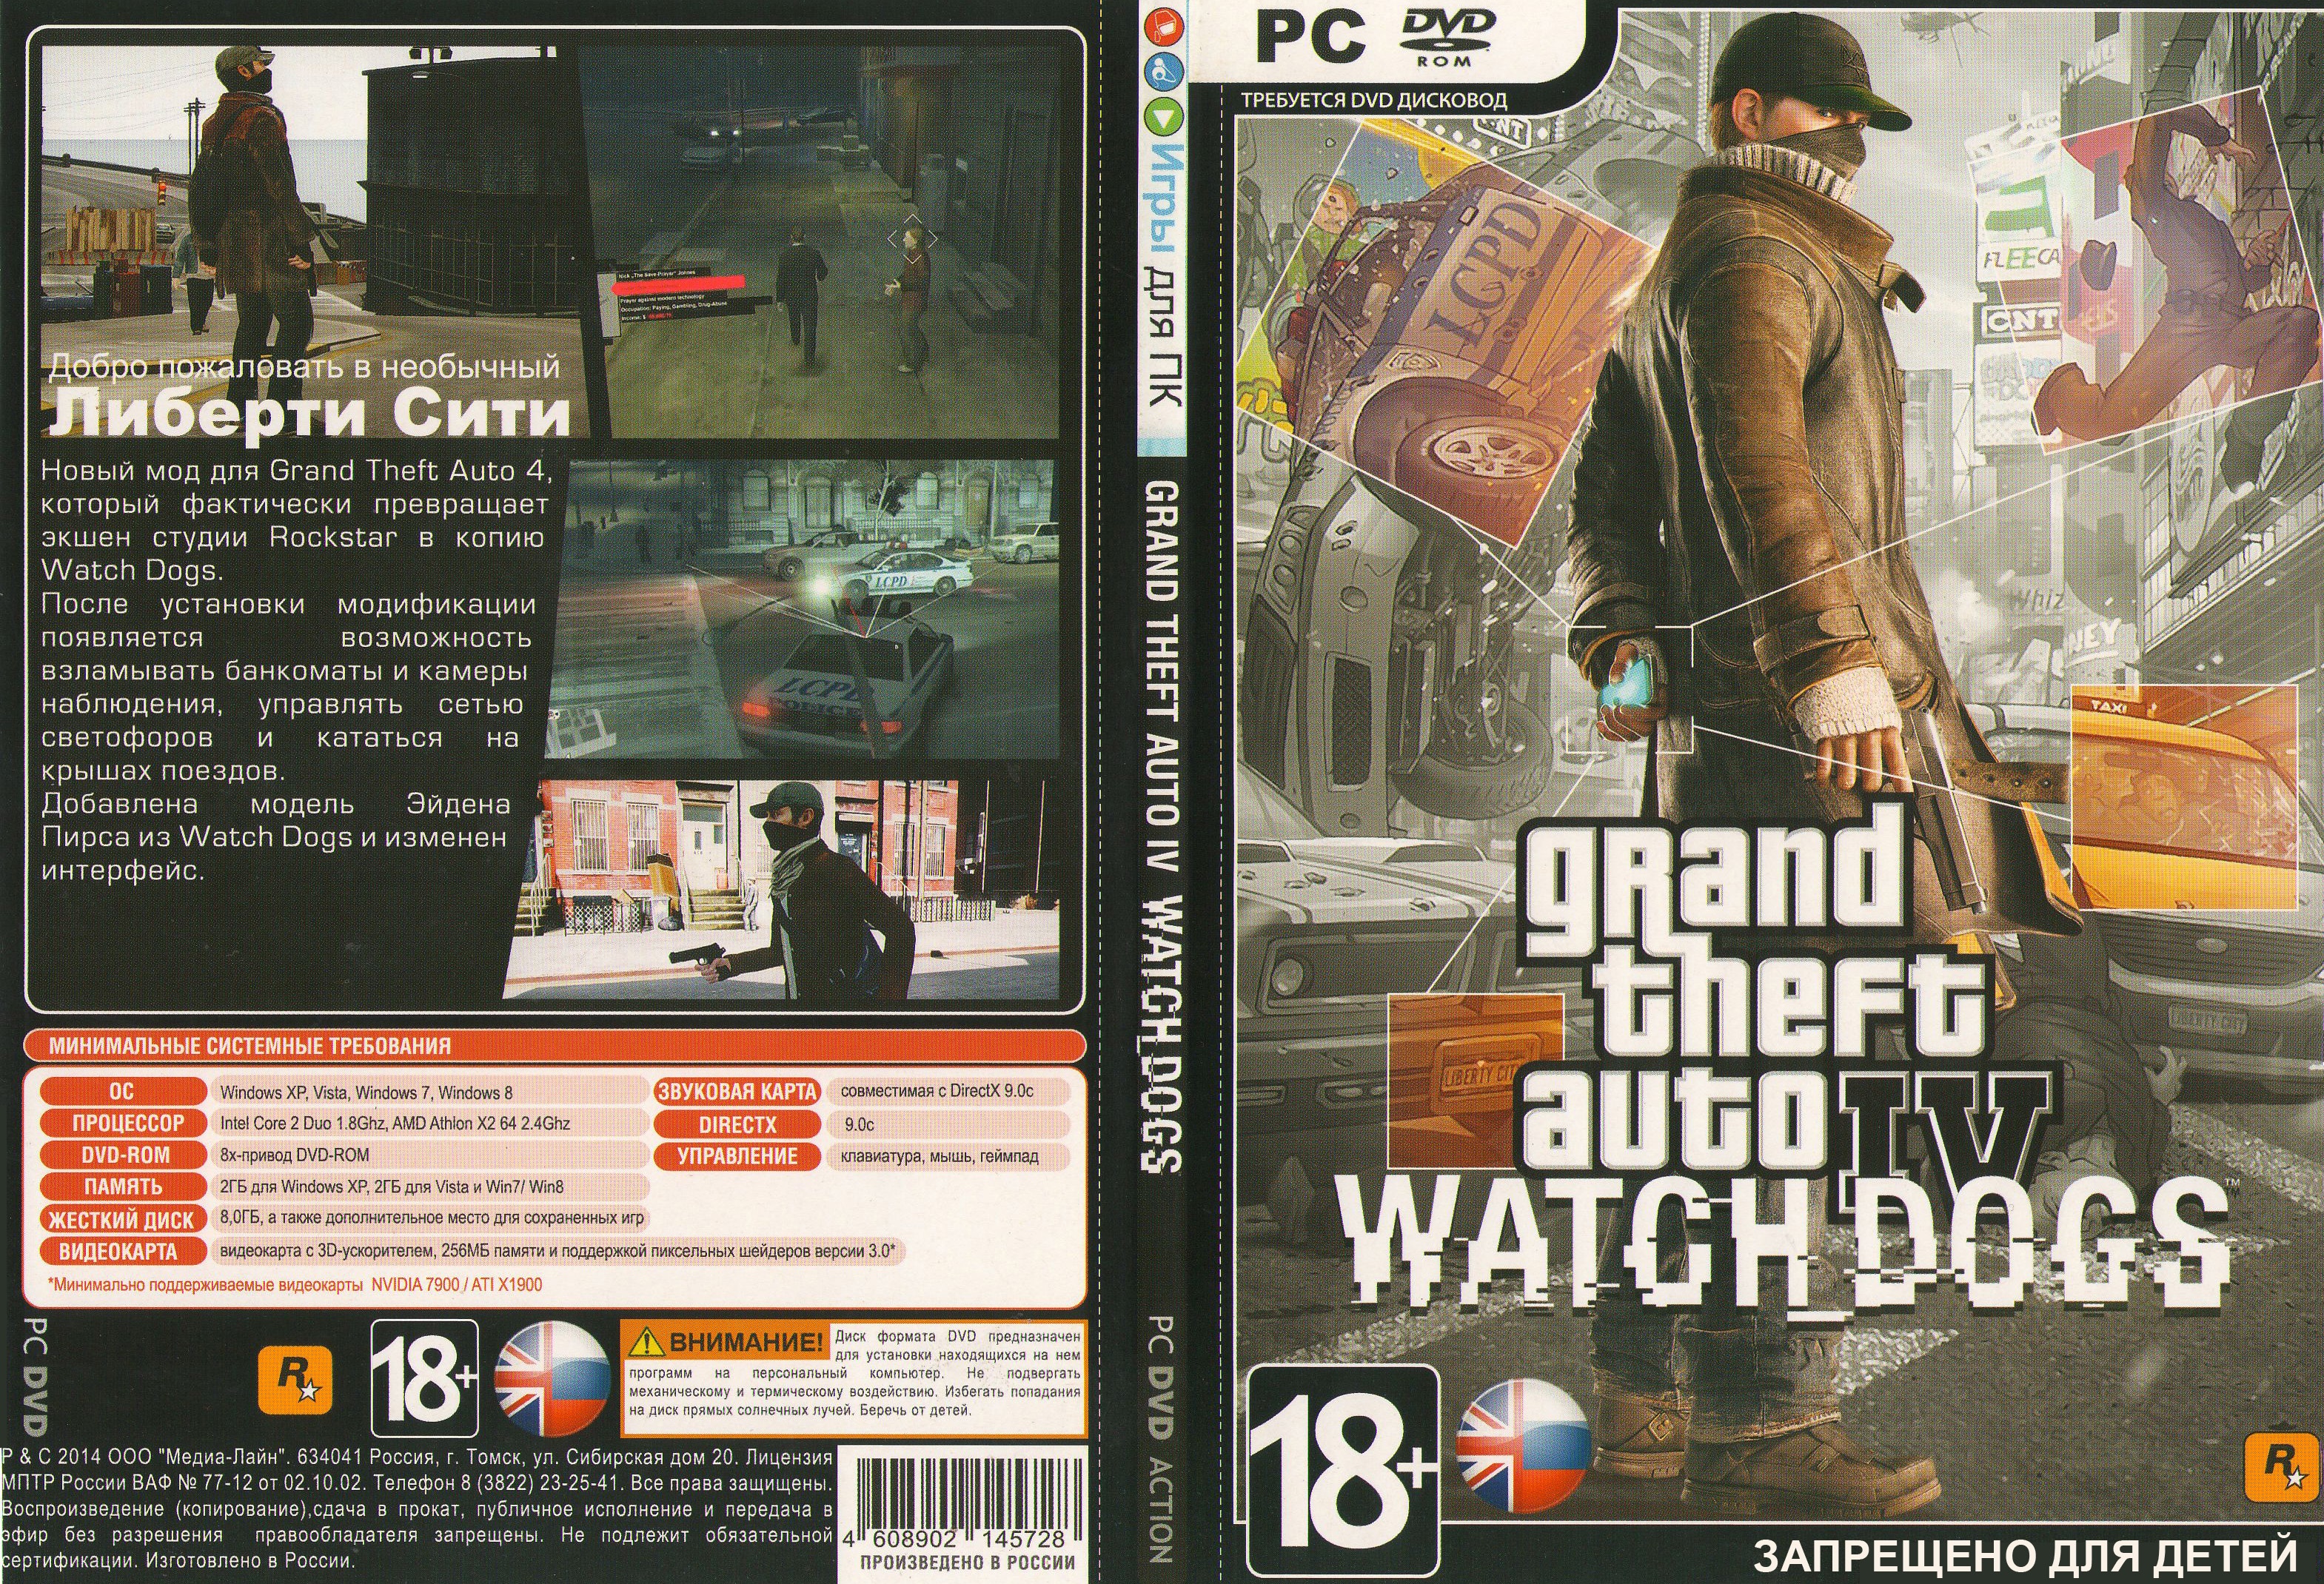 GRAND THEFT AUTO IV  WATCH DOGS box cover